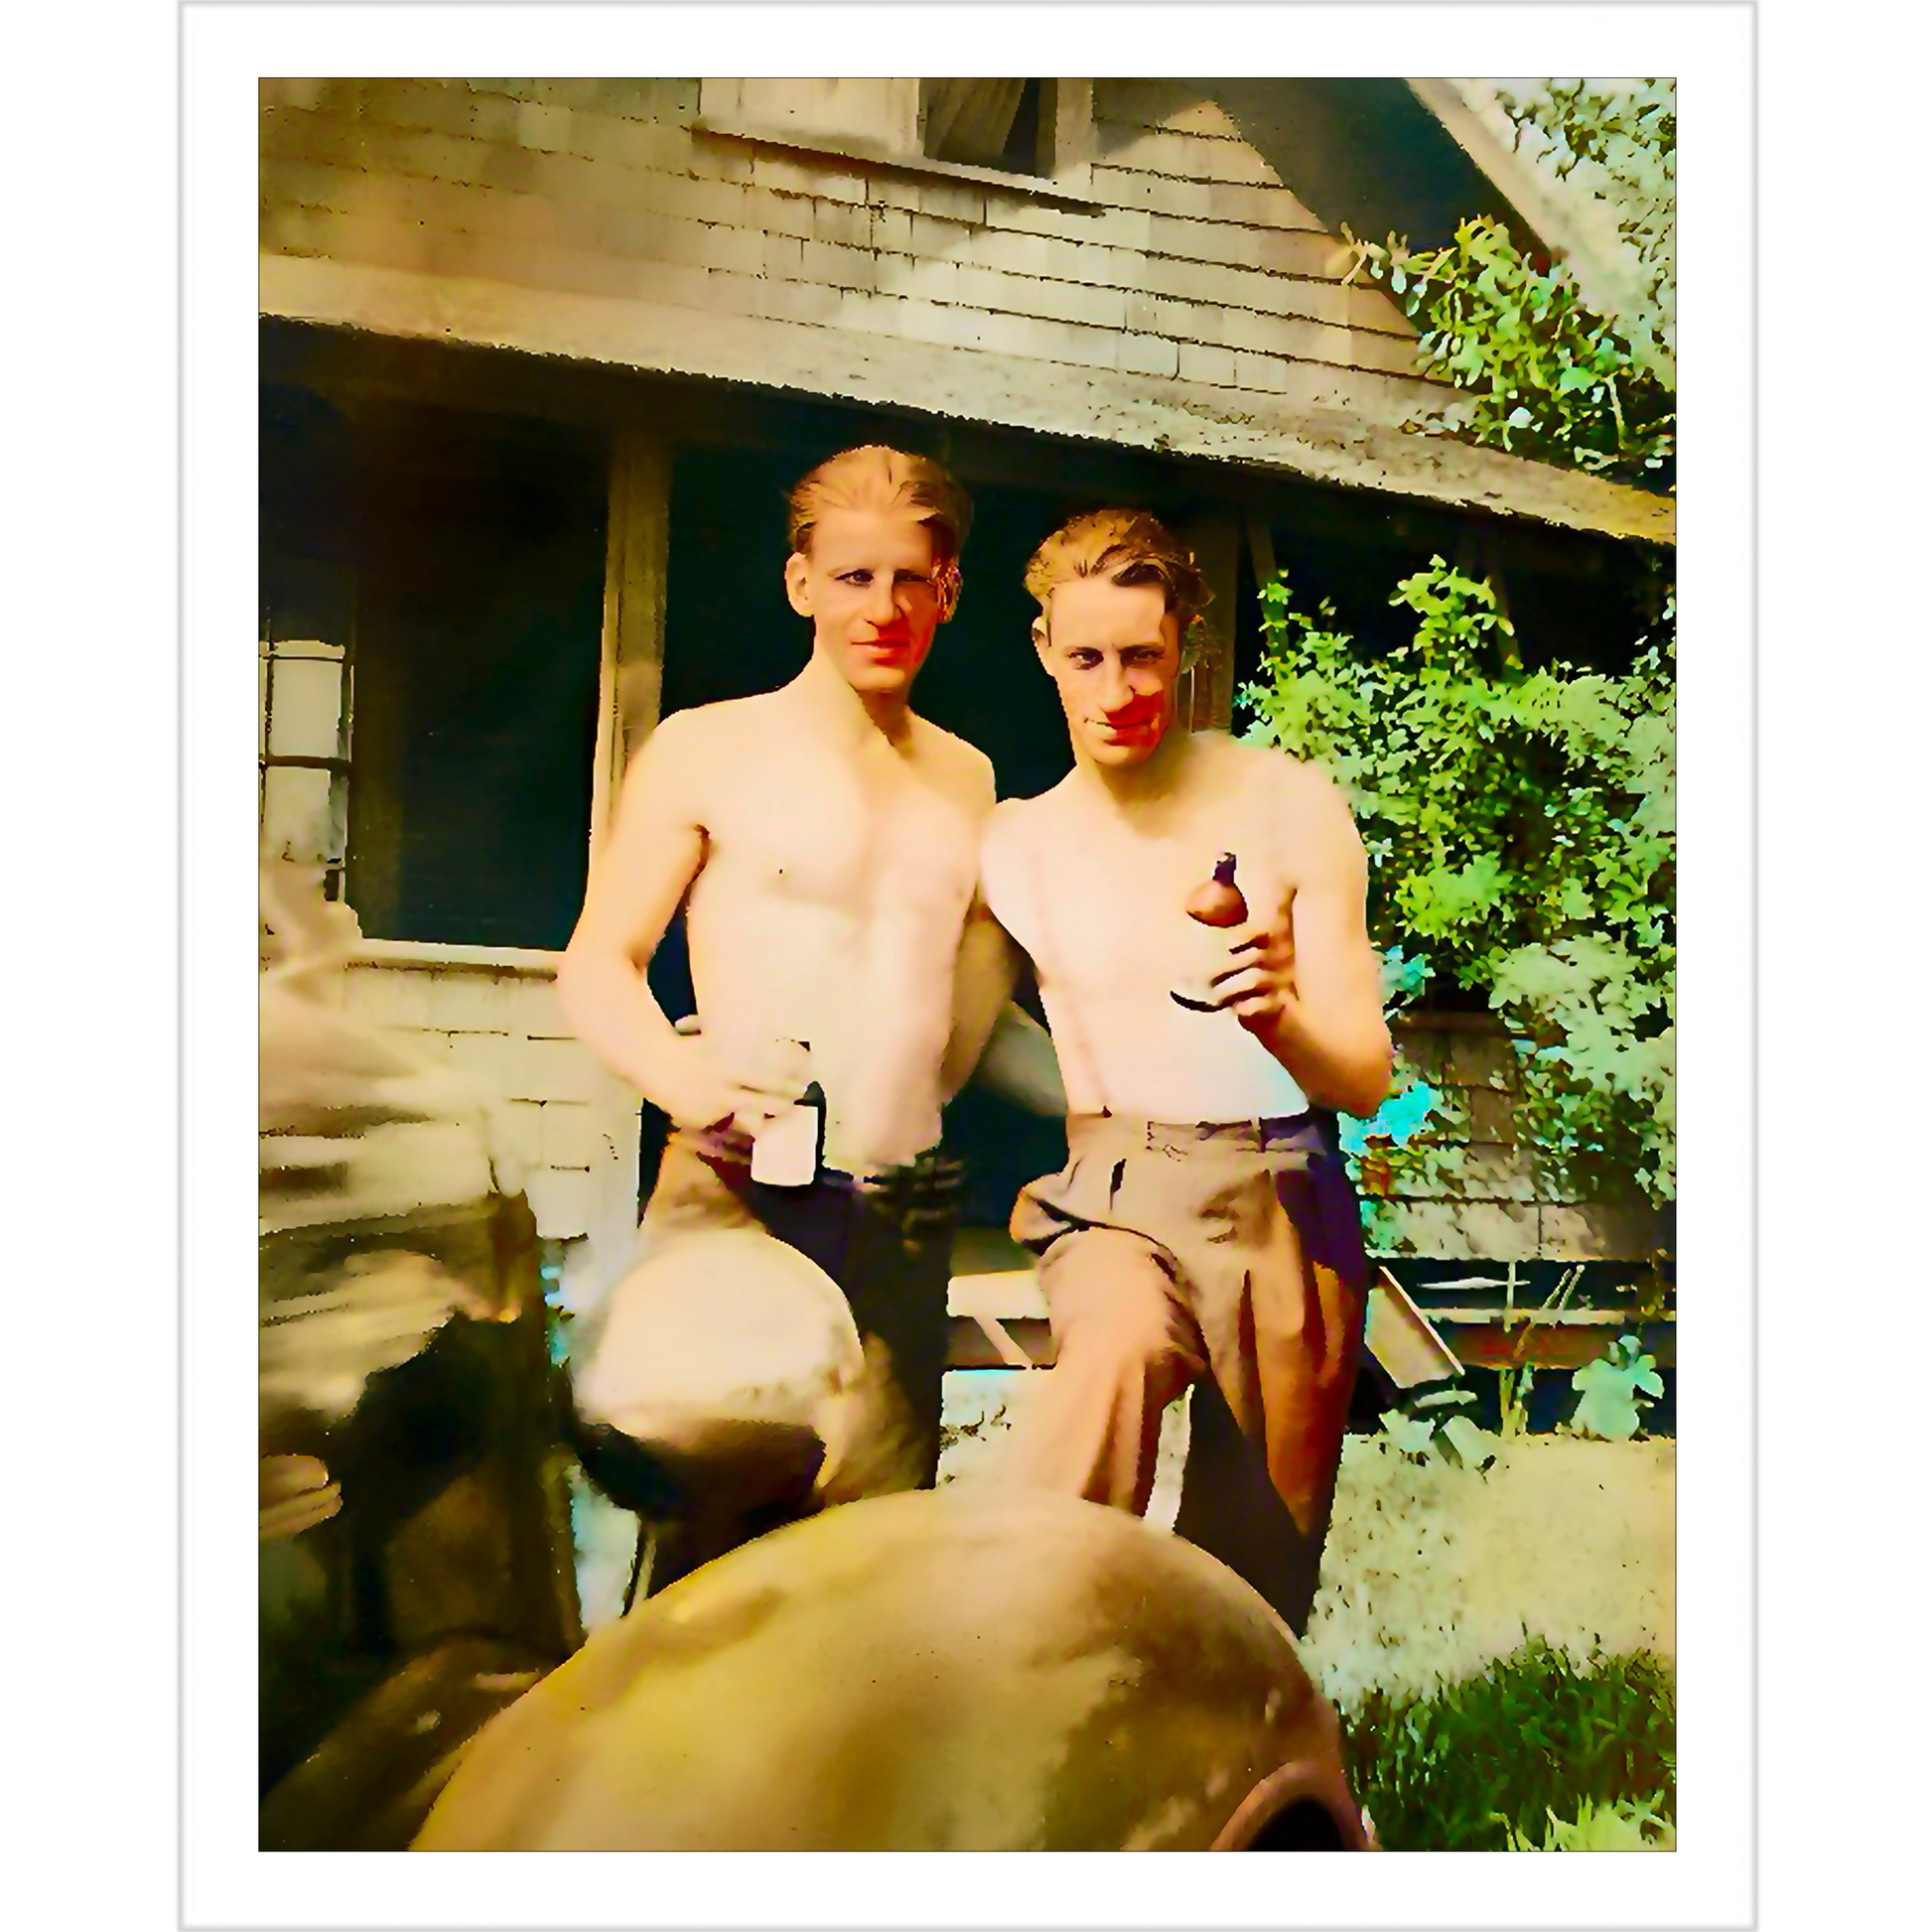 paire 006 | Giclee Artist Print Vintage Affectionate Men Gay LGBTQ Cabin Camping Queer Hiking